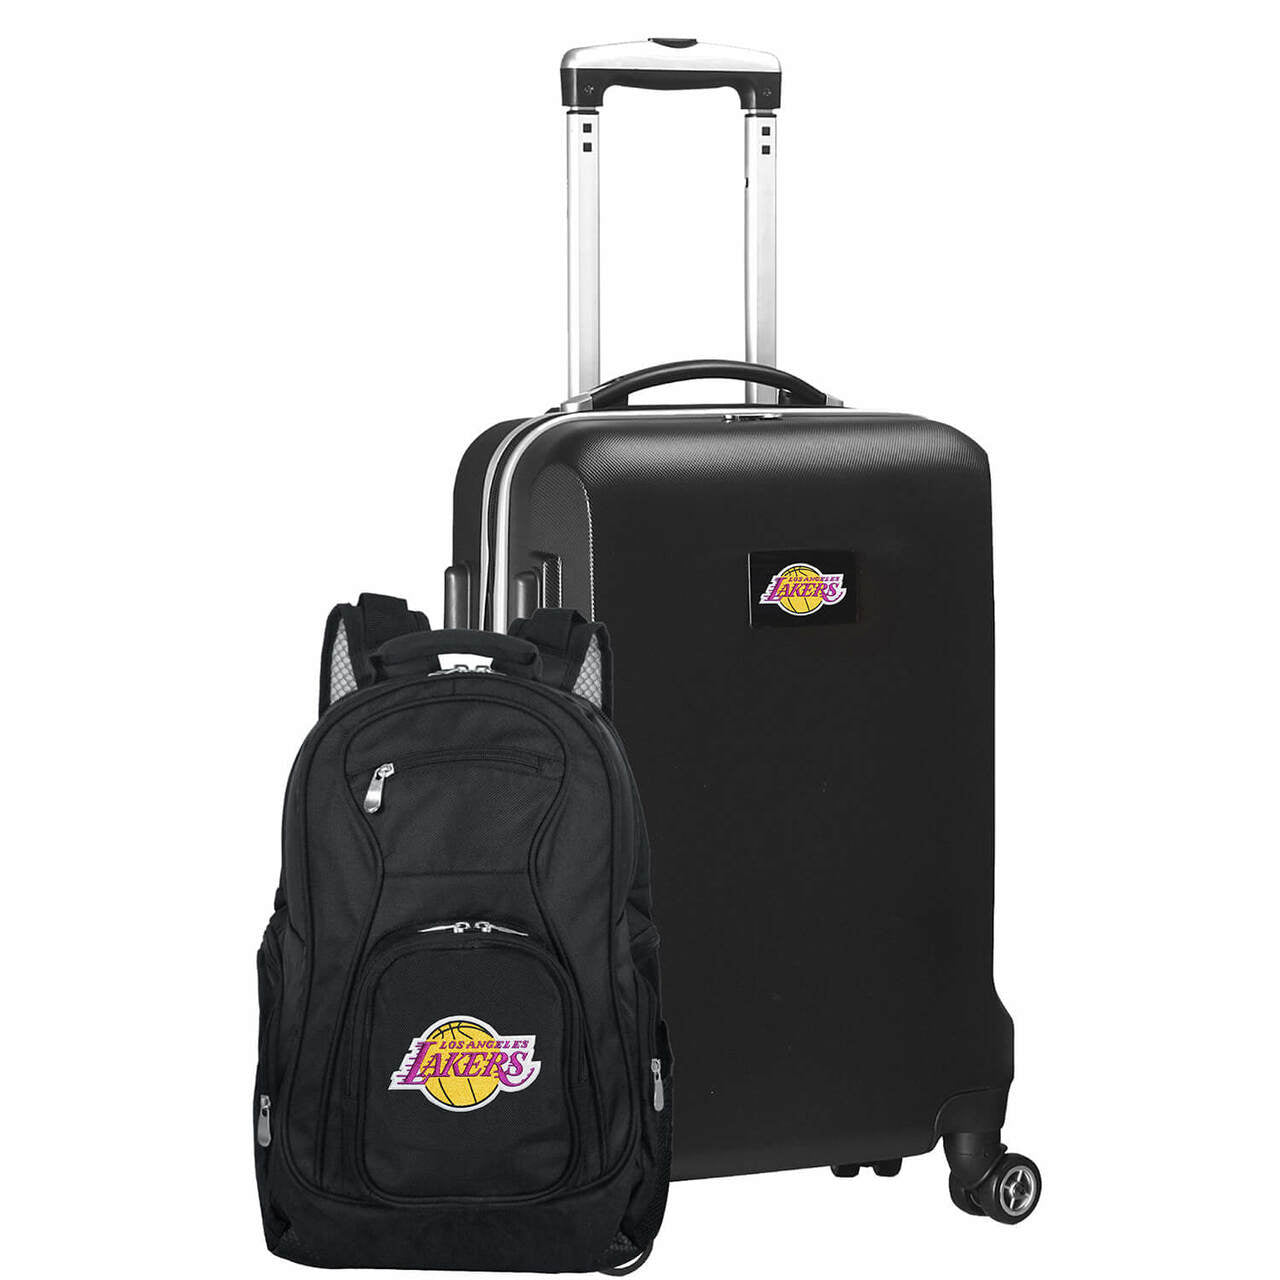 LA Lakers Deluxe 2-Piece Backpack and Carry on Set in Black